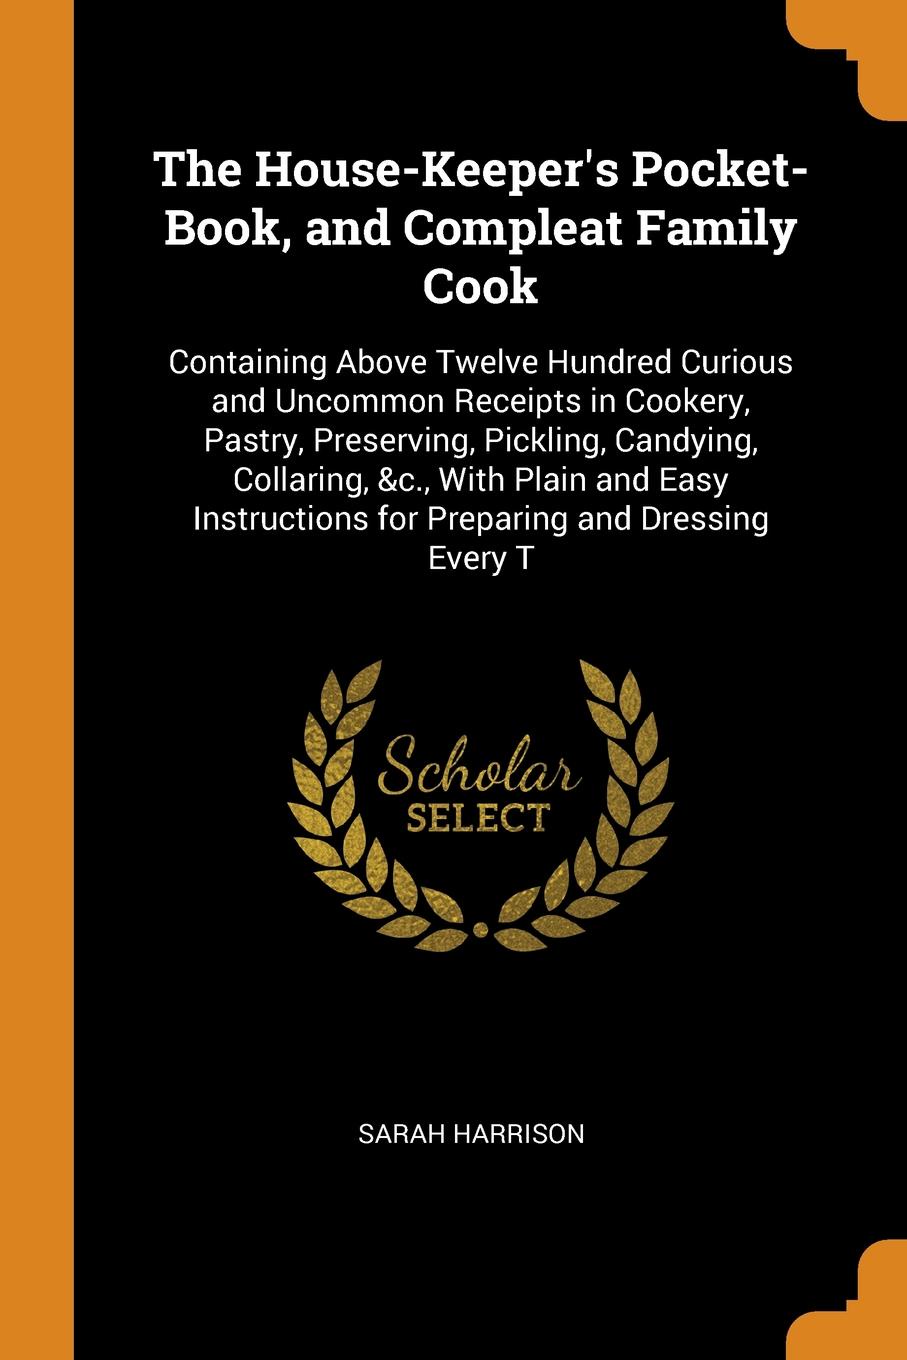 The House-Keeper`s Pocket-Book, and Compleat Family Cook. Containing Above Twelve Hundred Curious and Uncommon Receipts in Cookery, Pastry, Preserving, Pickling, Candying, Collaring, &c., With Plain and Easy Instructions for Preparing and Dressing...